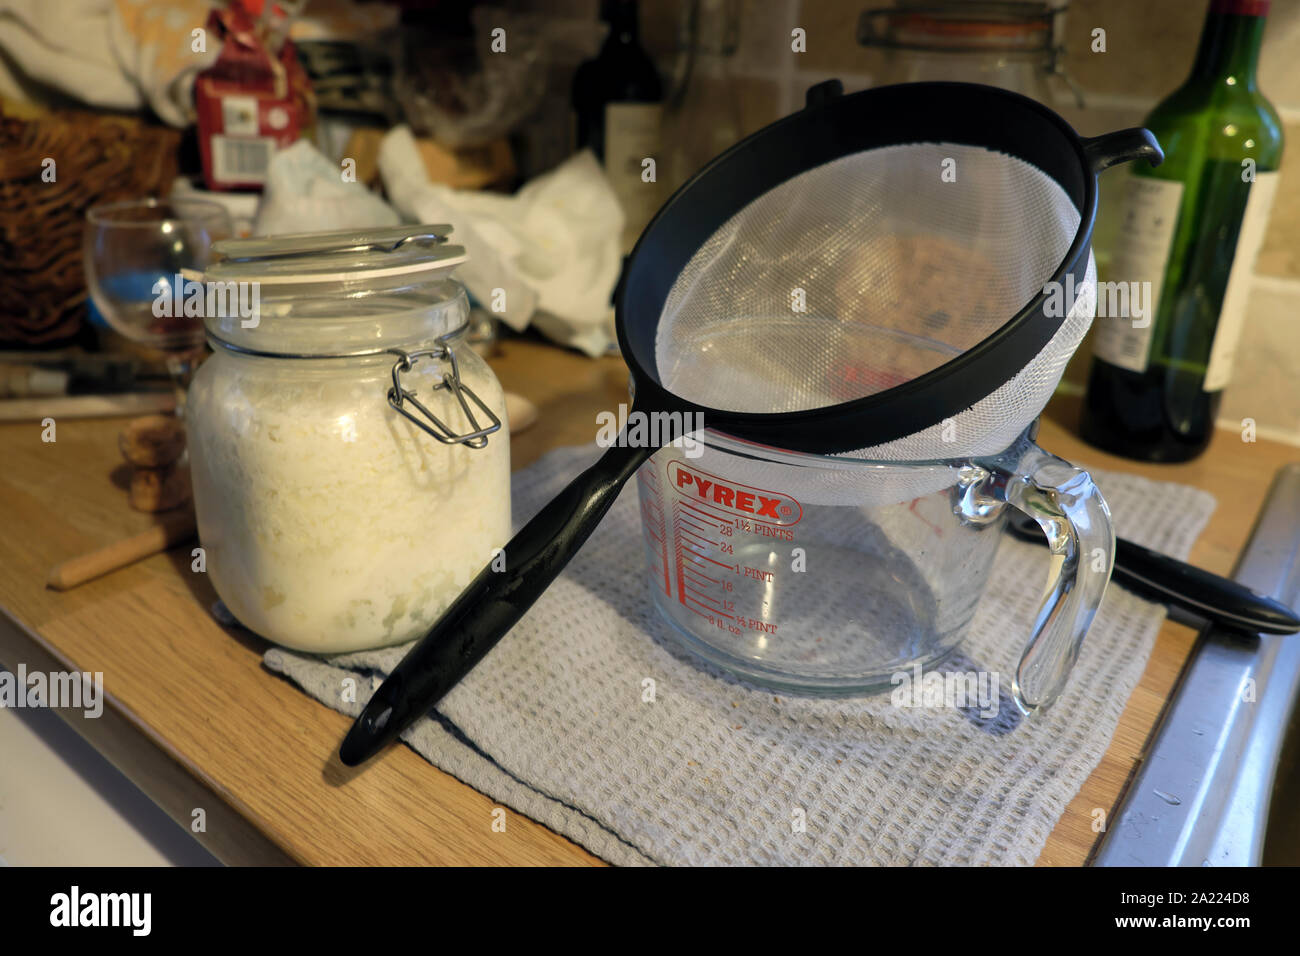 Utensils for making kefir a homemade organic probiotic made by fermentation with whole milk in a kilner jar in a kitchen at home Wales UK KATHY DEWITT Stock Photo